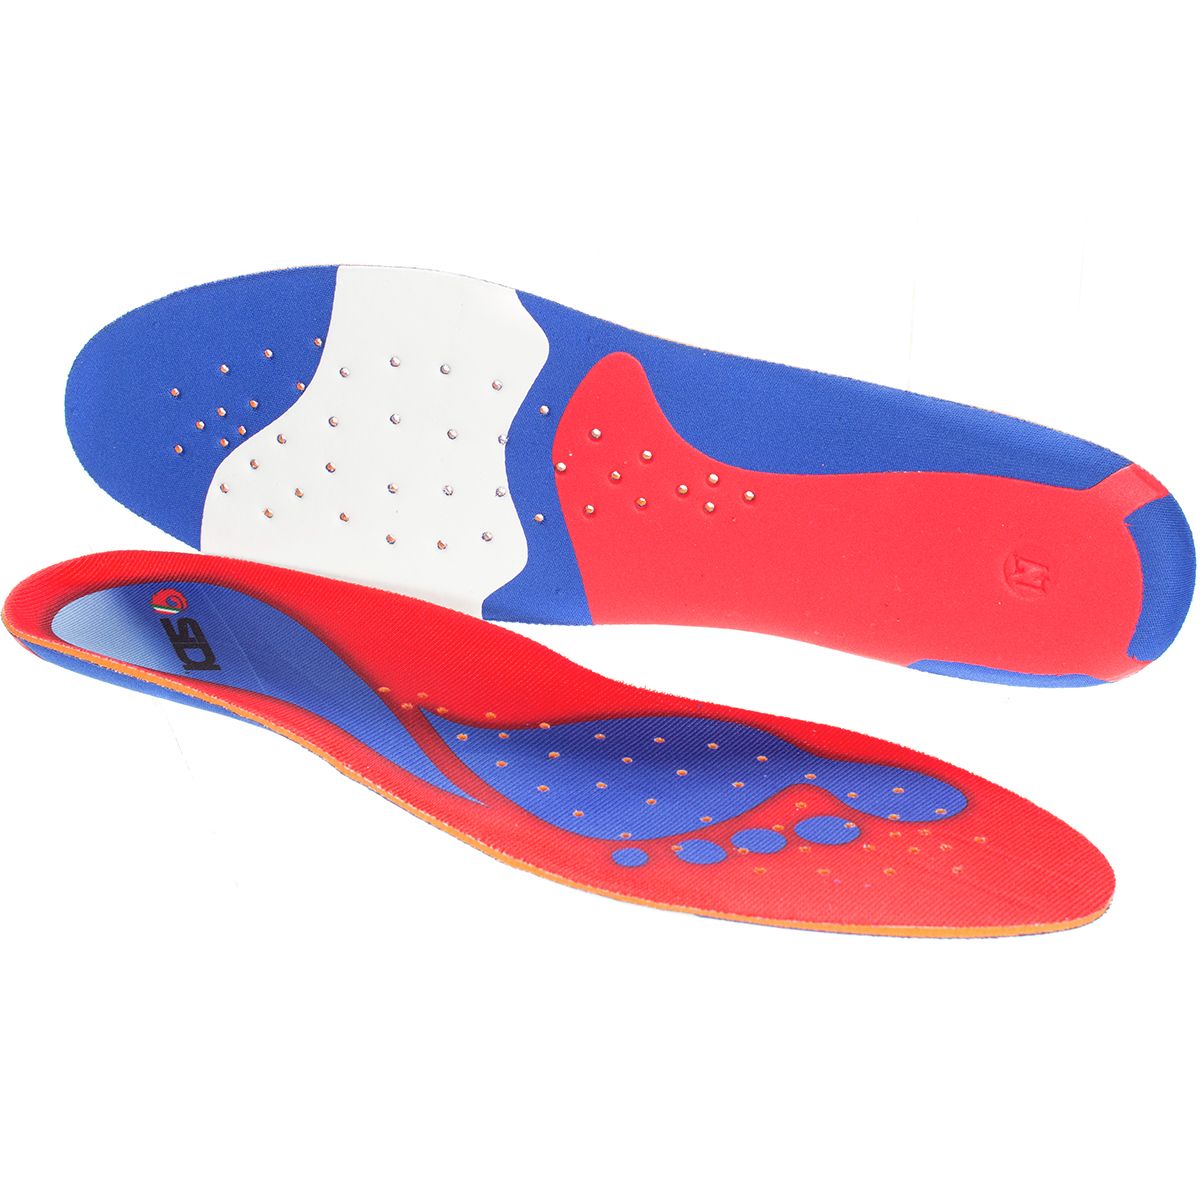 Sidi Memory Cycling Insole Red/White/Blue, 39.0